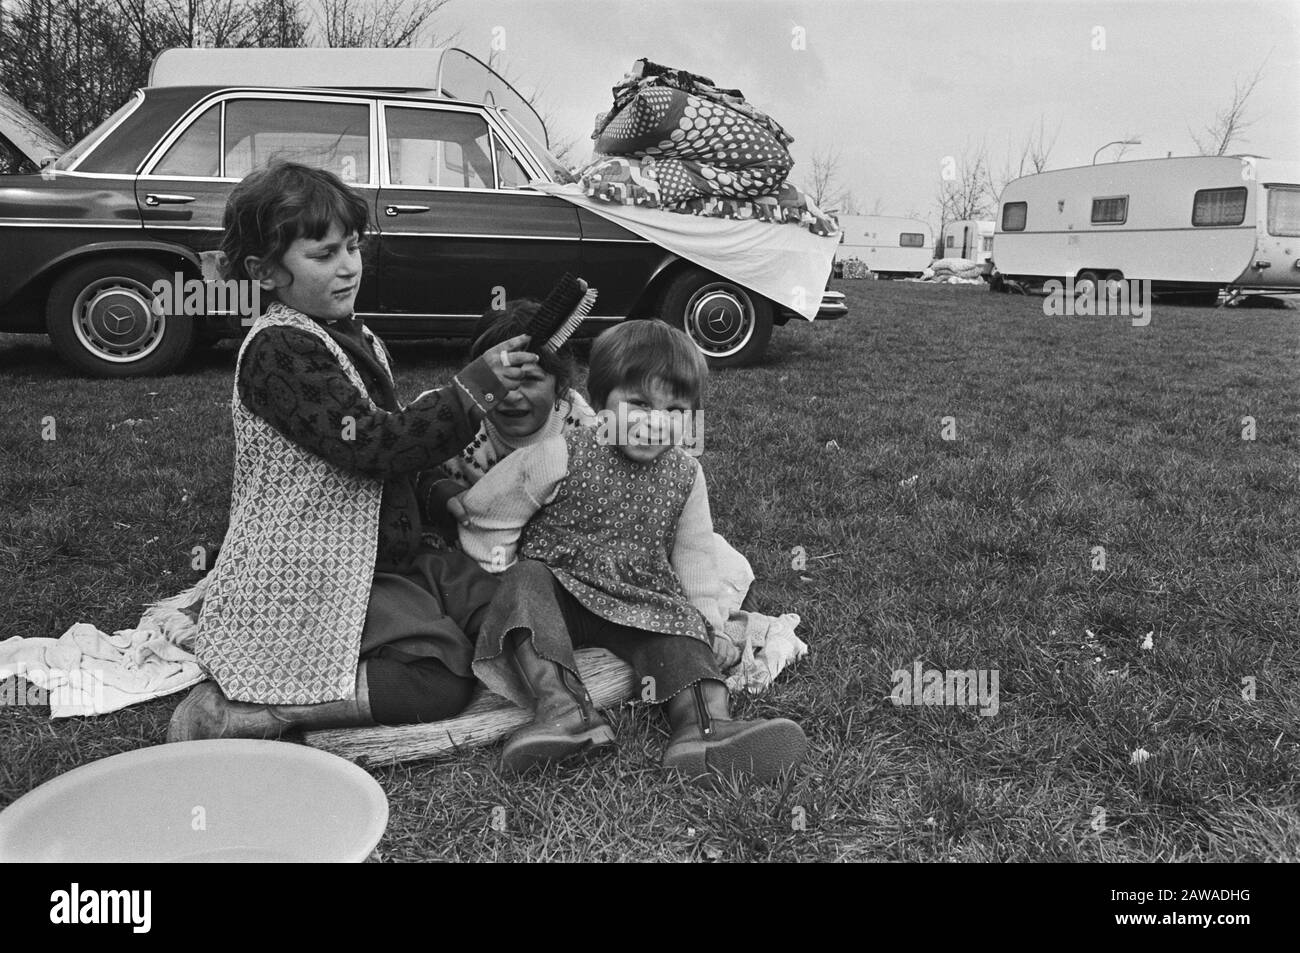 Gypsies of the Romanov family installed a camp site in Lelystad  Girls make each toilet Date: March 3, 1977 Location: Flevoland, Lelystad Keywords: Roma and Sinti, cars, kids Stock Photo